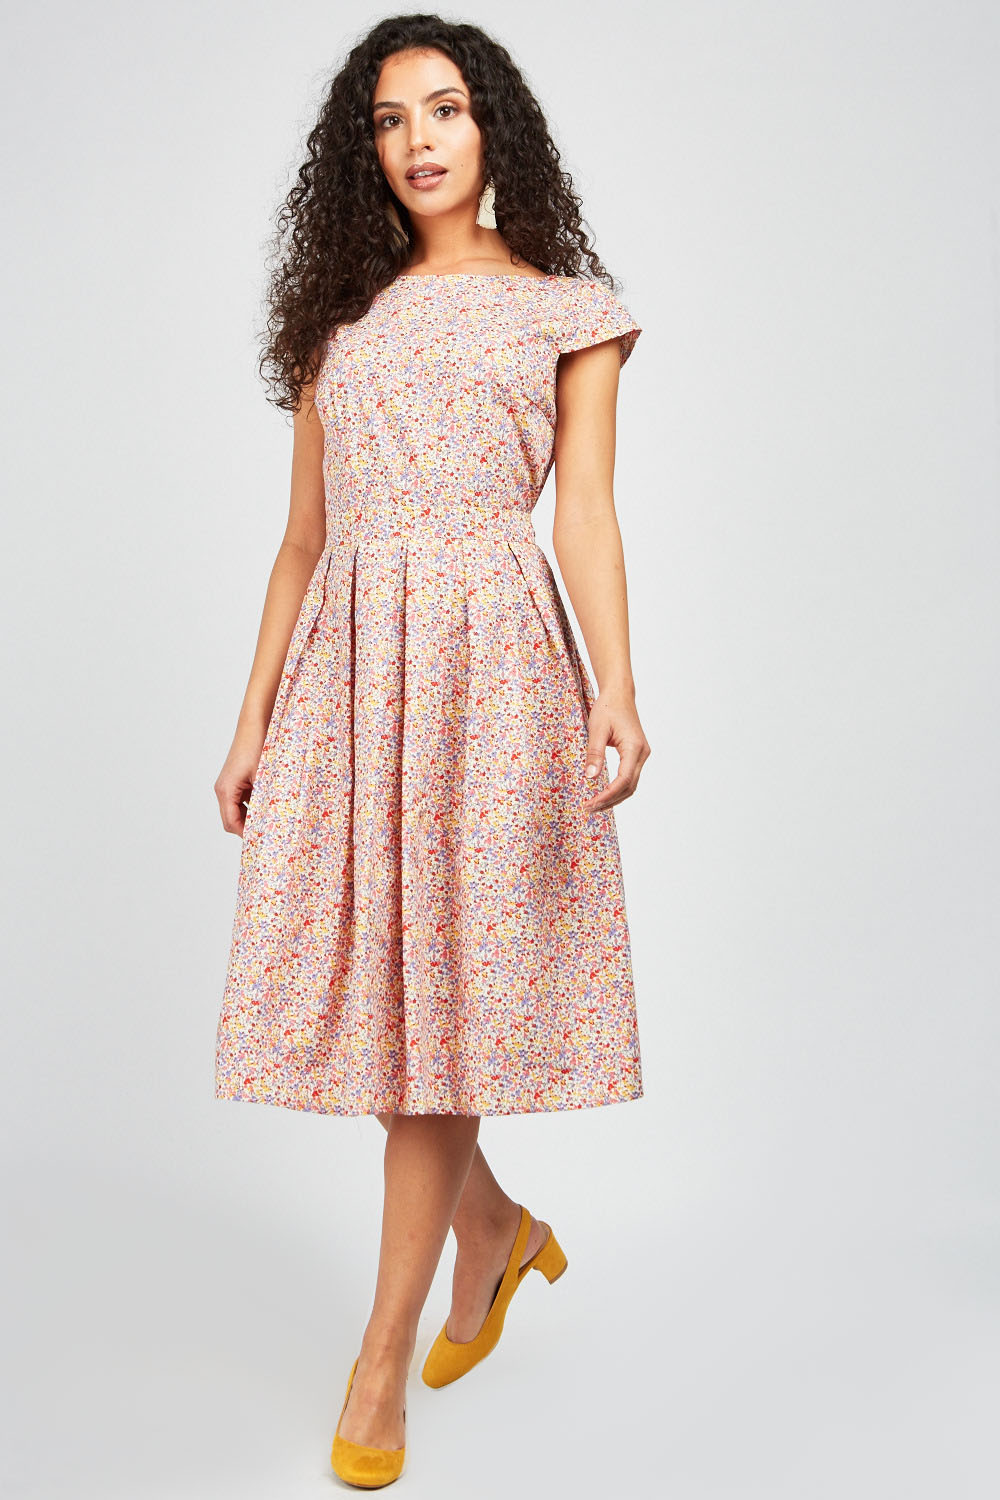 Ditsy Floral Print Frilly Dress - Just $7